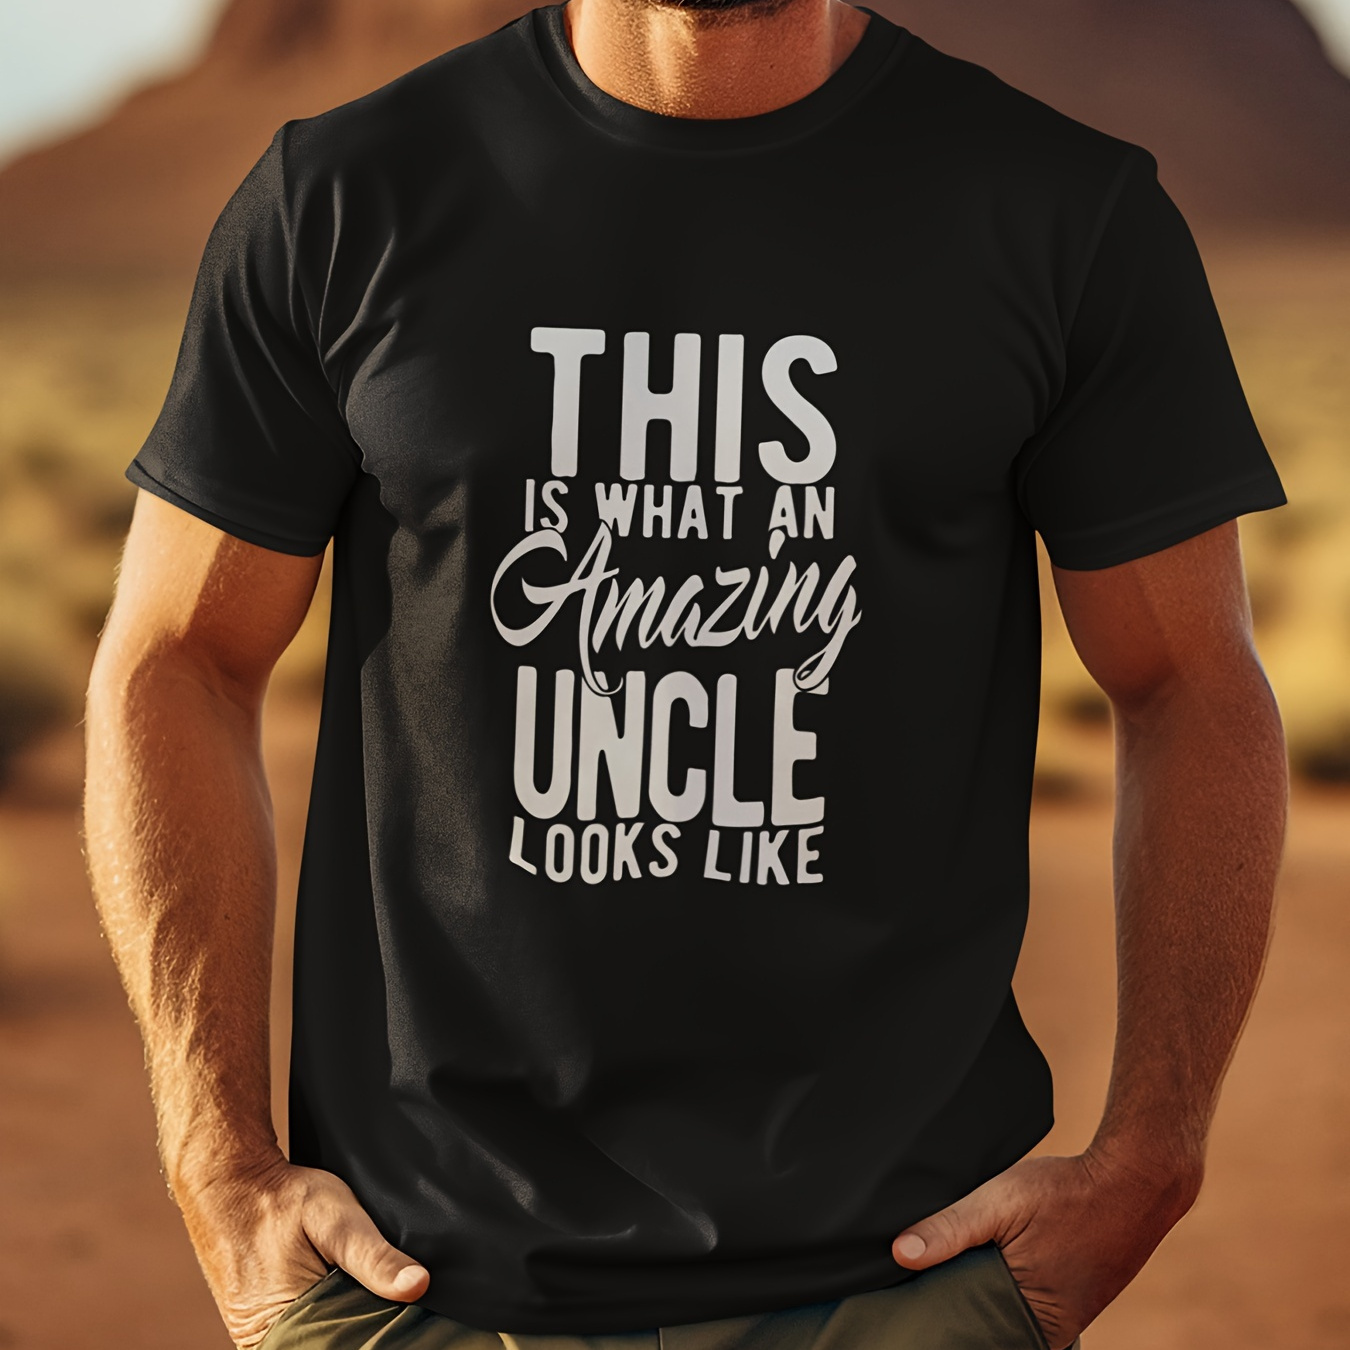 

'this Is What An Amazing Uncle Looks Like' - Men's Front Printed Short Sleeved T-shirt - Machine Washable, Elegant Round Collar Tops - Gift For Uncle